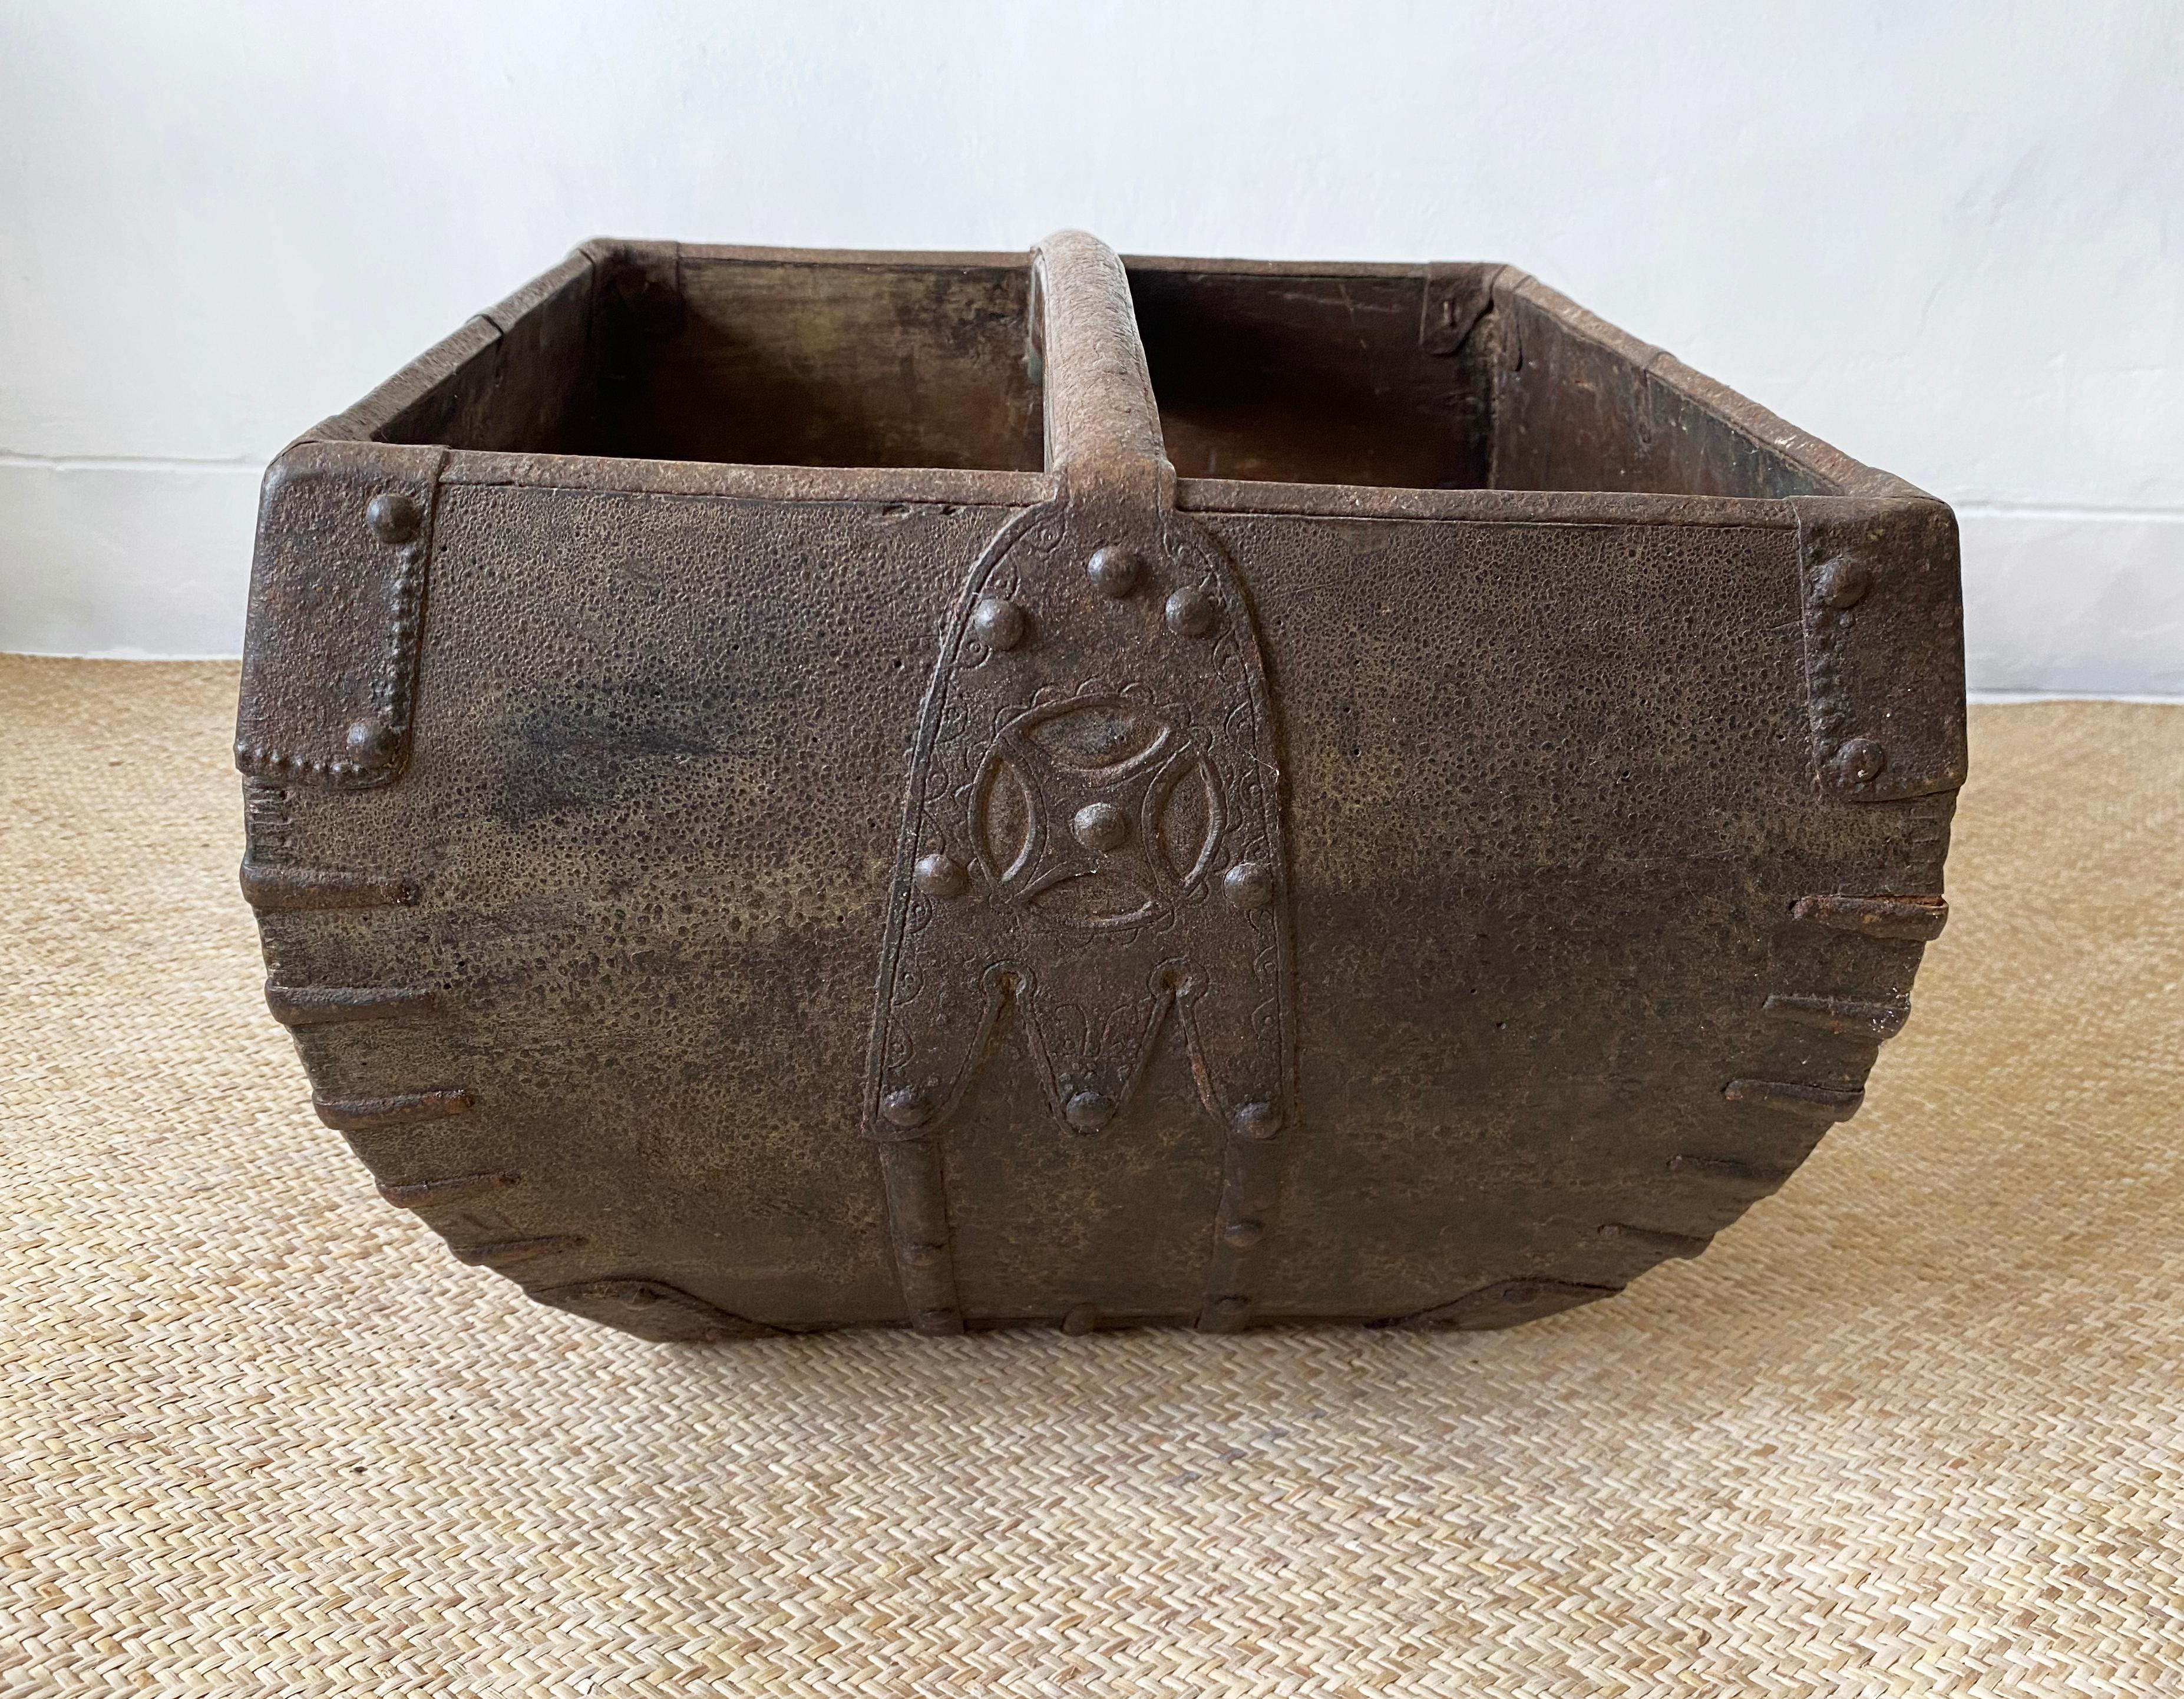 A rice measure container handcrafted more than 100 years from wood and supported by engraved iron edges and an arched handle. There is a wonderful age related patina to the metal and wood. The container is able to hold a Dou of rice a once abundant